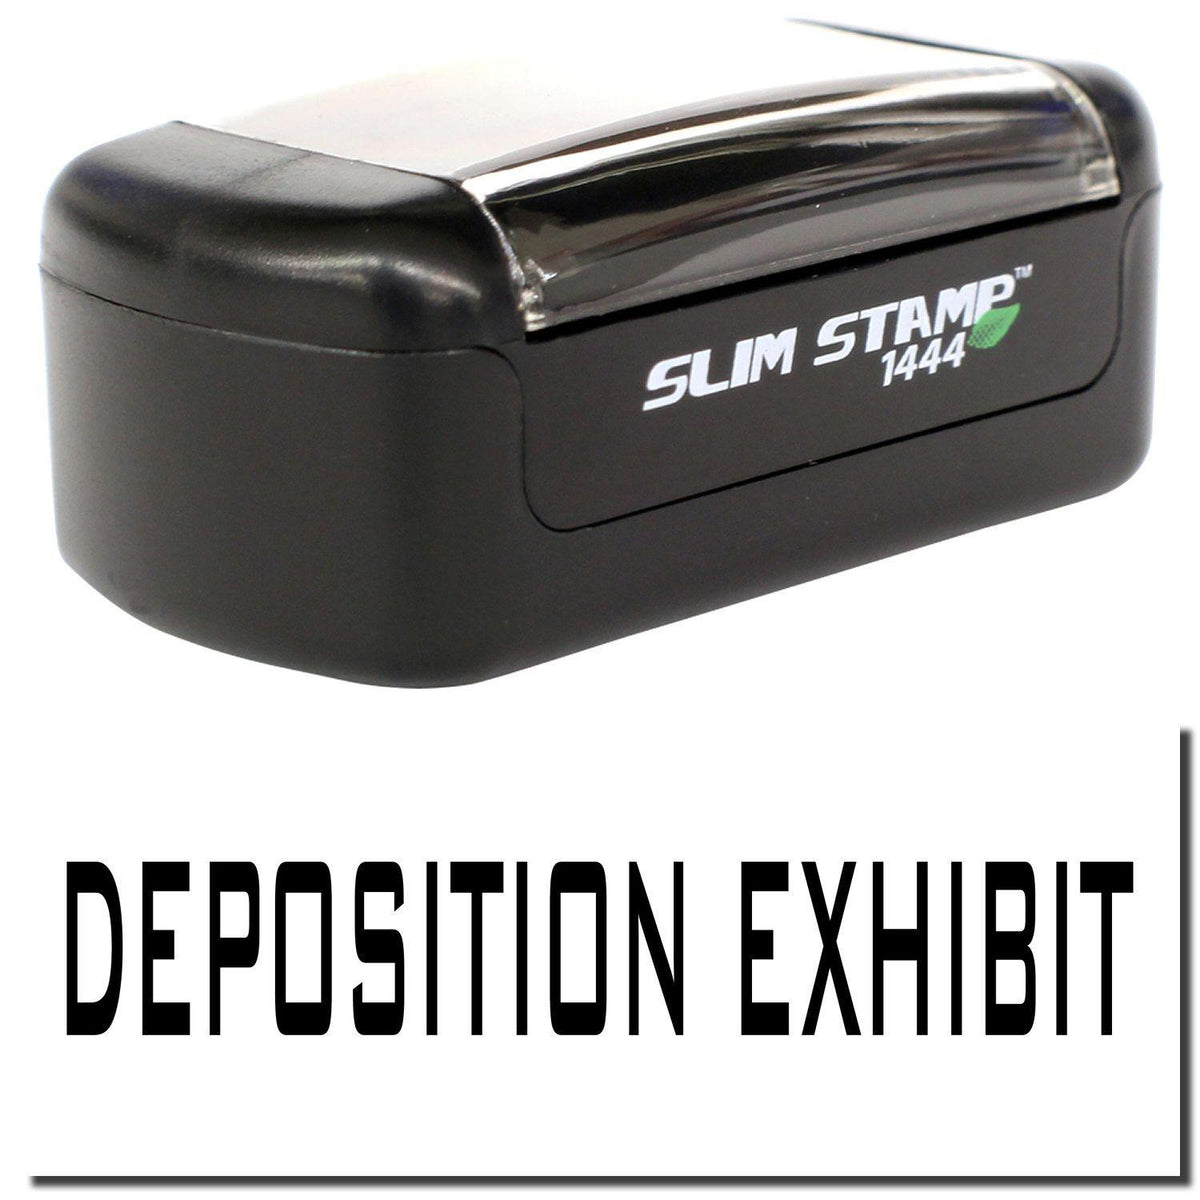 A stock office pre-inked stamp with a stamped image showing how the text &quot;DEPOSITION EXHIBIT&quot; is displayed after stamping.